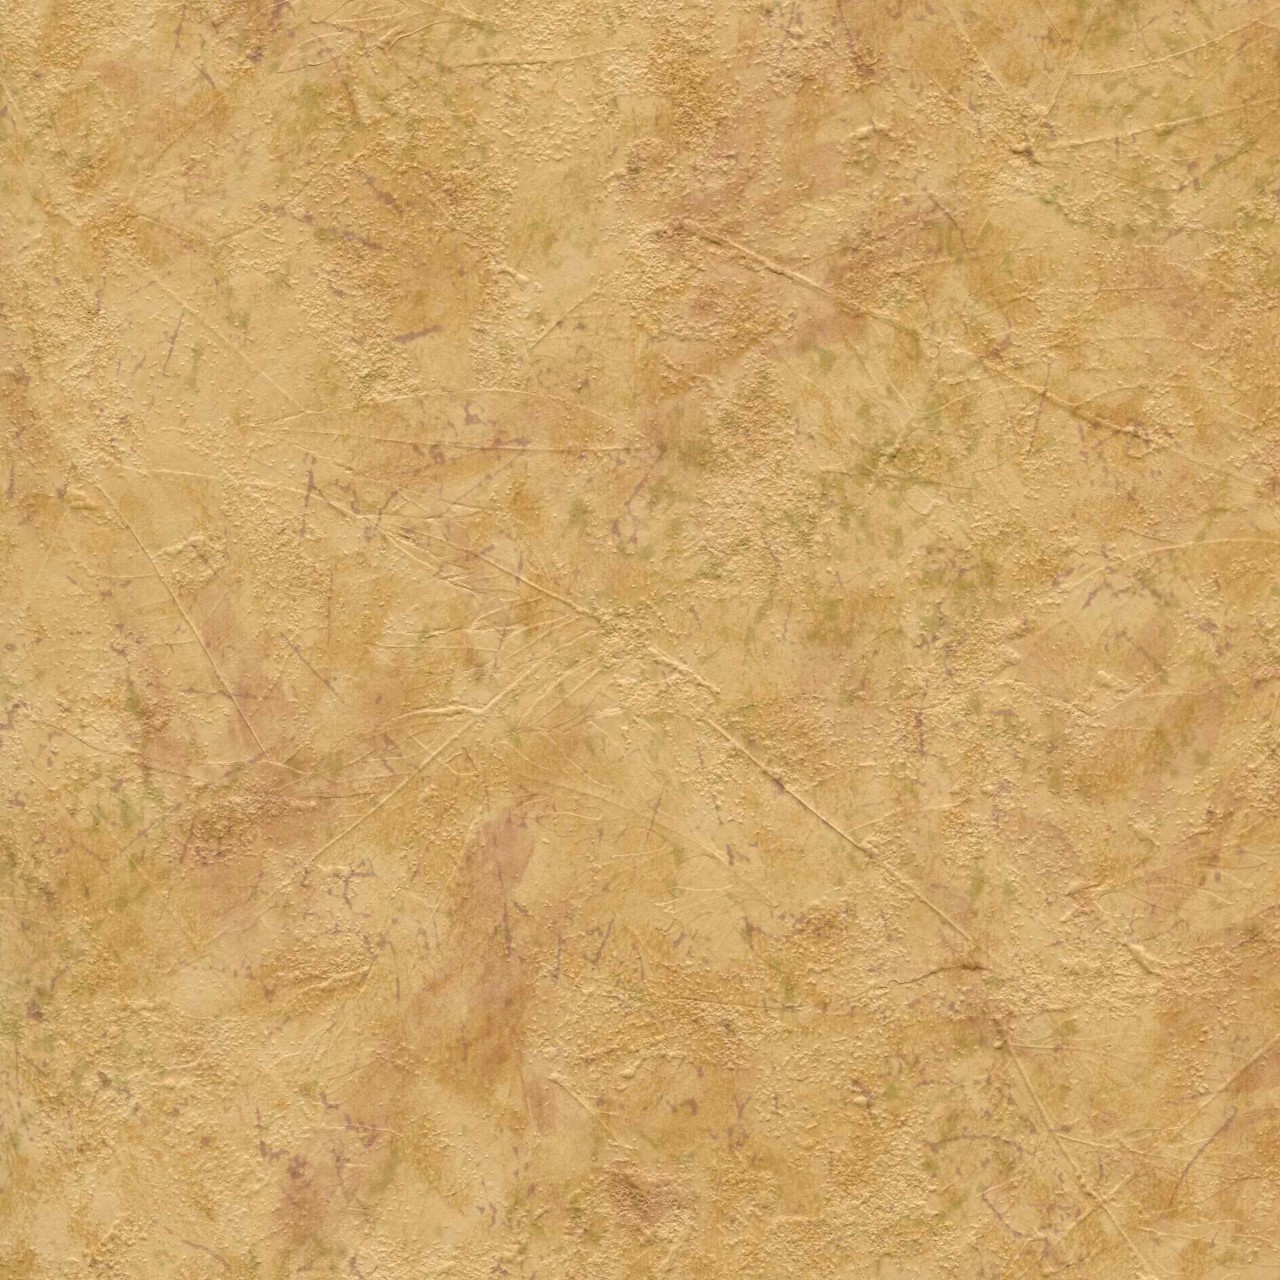 Home Pattern Rustic Brown Texture Textures Wallpaper With